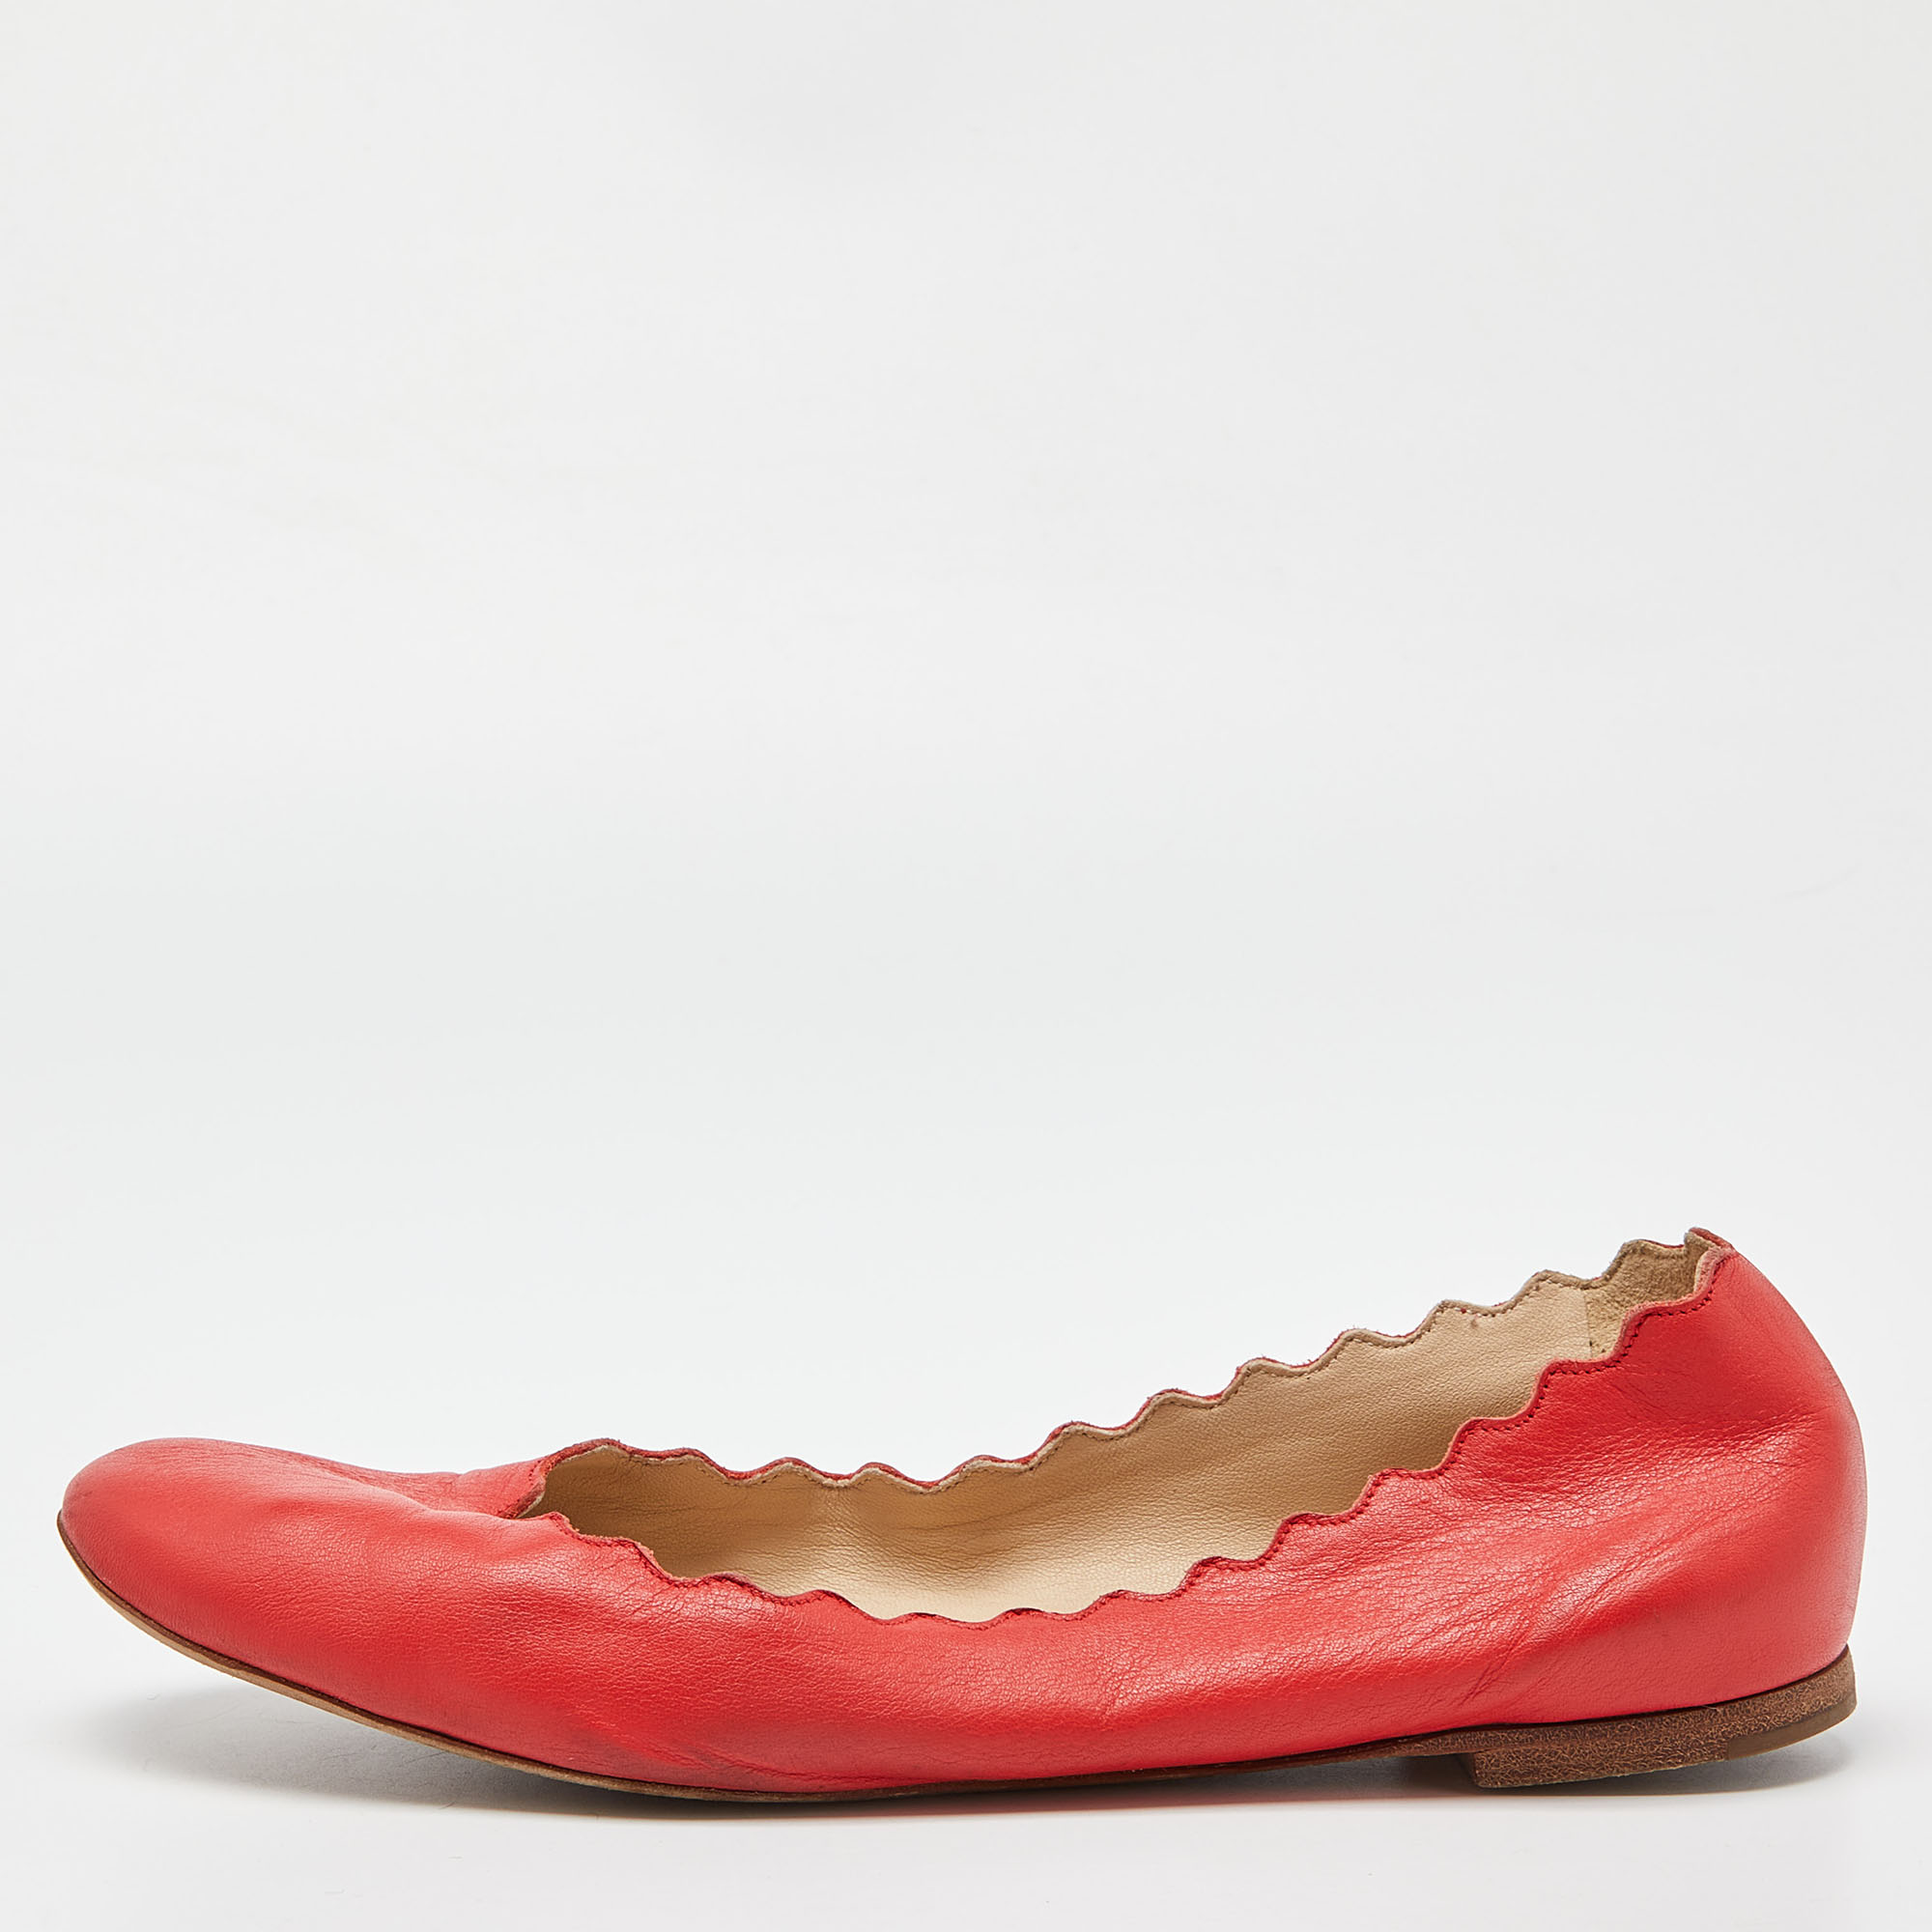 Chloé Red Leather Lauren Scalloped Ballet Flats Size 38